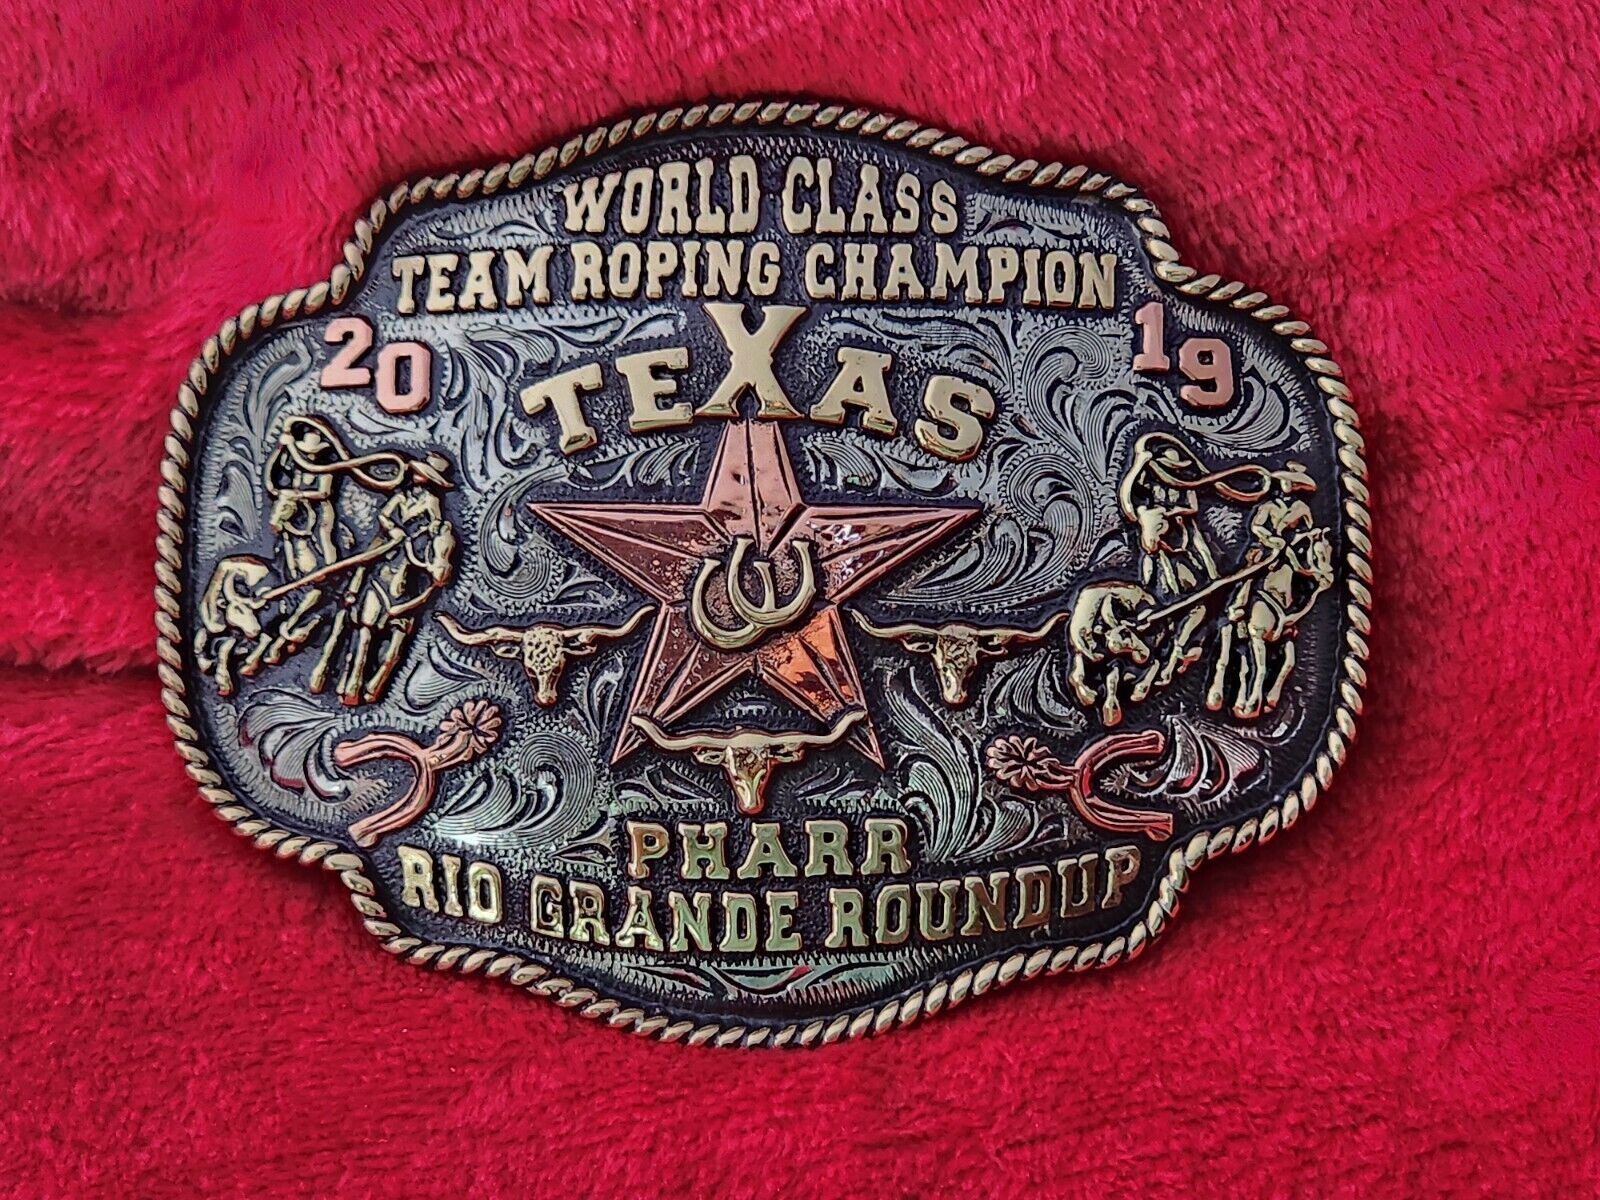 RODEO TEAM ROPING CHAMPION TROPHY BUCKLE☆PRO☆PHARR TEXAS☆2019☆RARE☆985